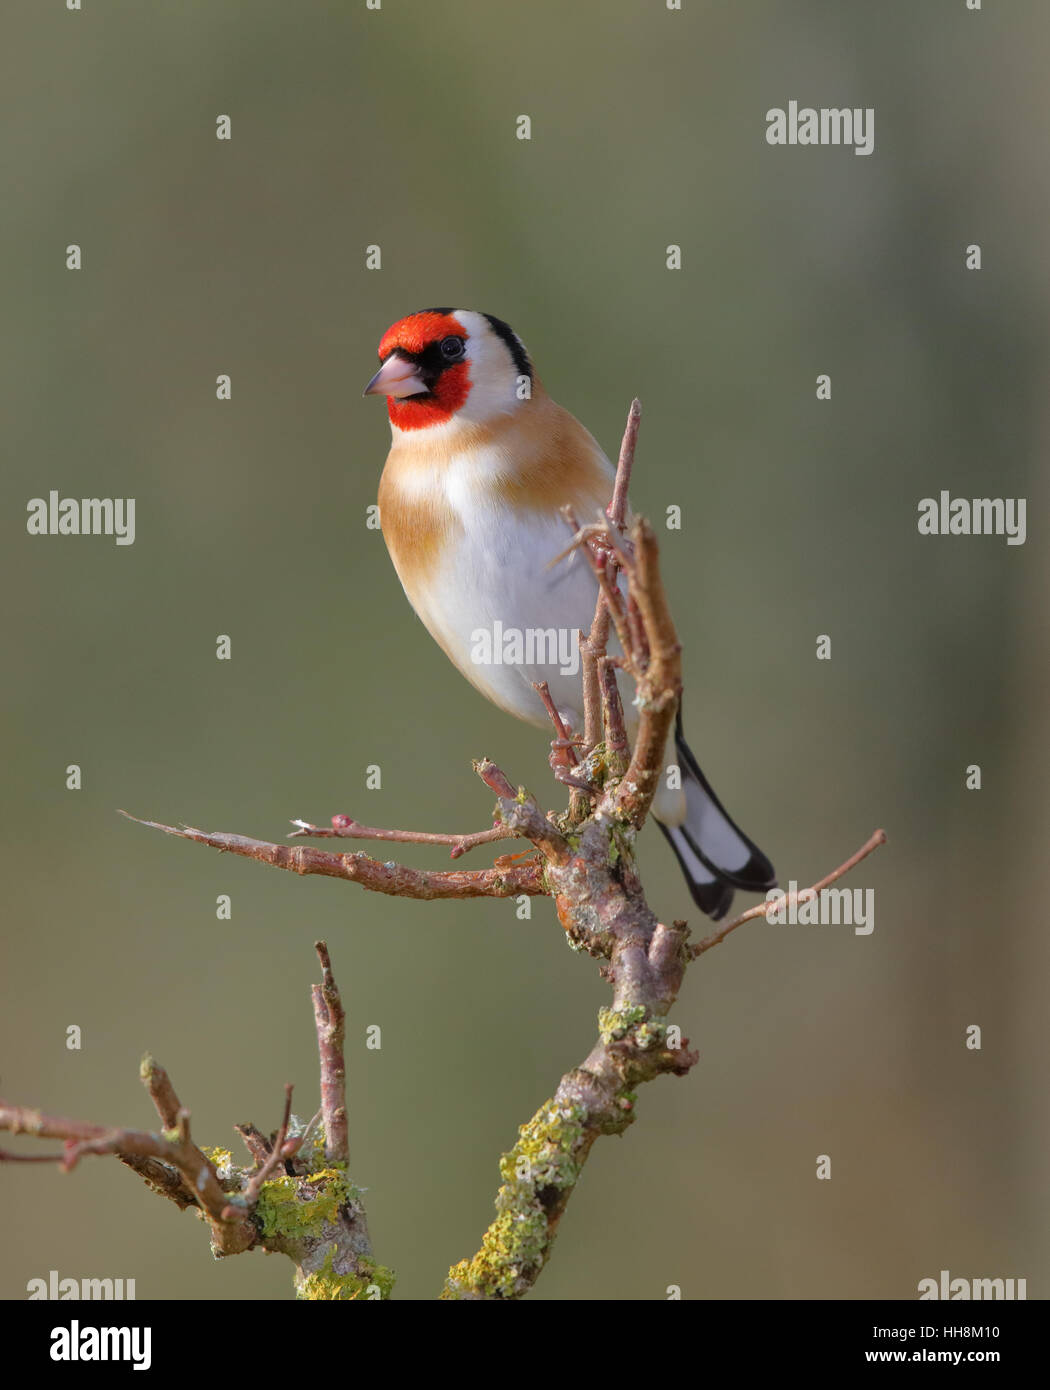 Goldfinch, Carduelis carduelis, on a branch in winter Stock Photo